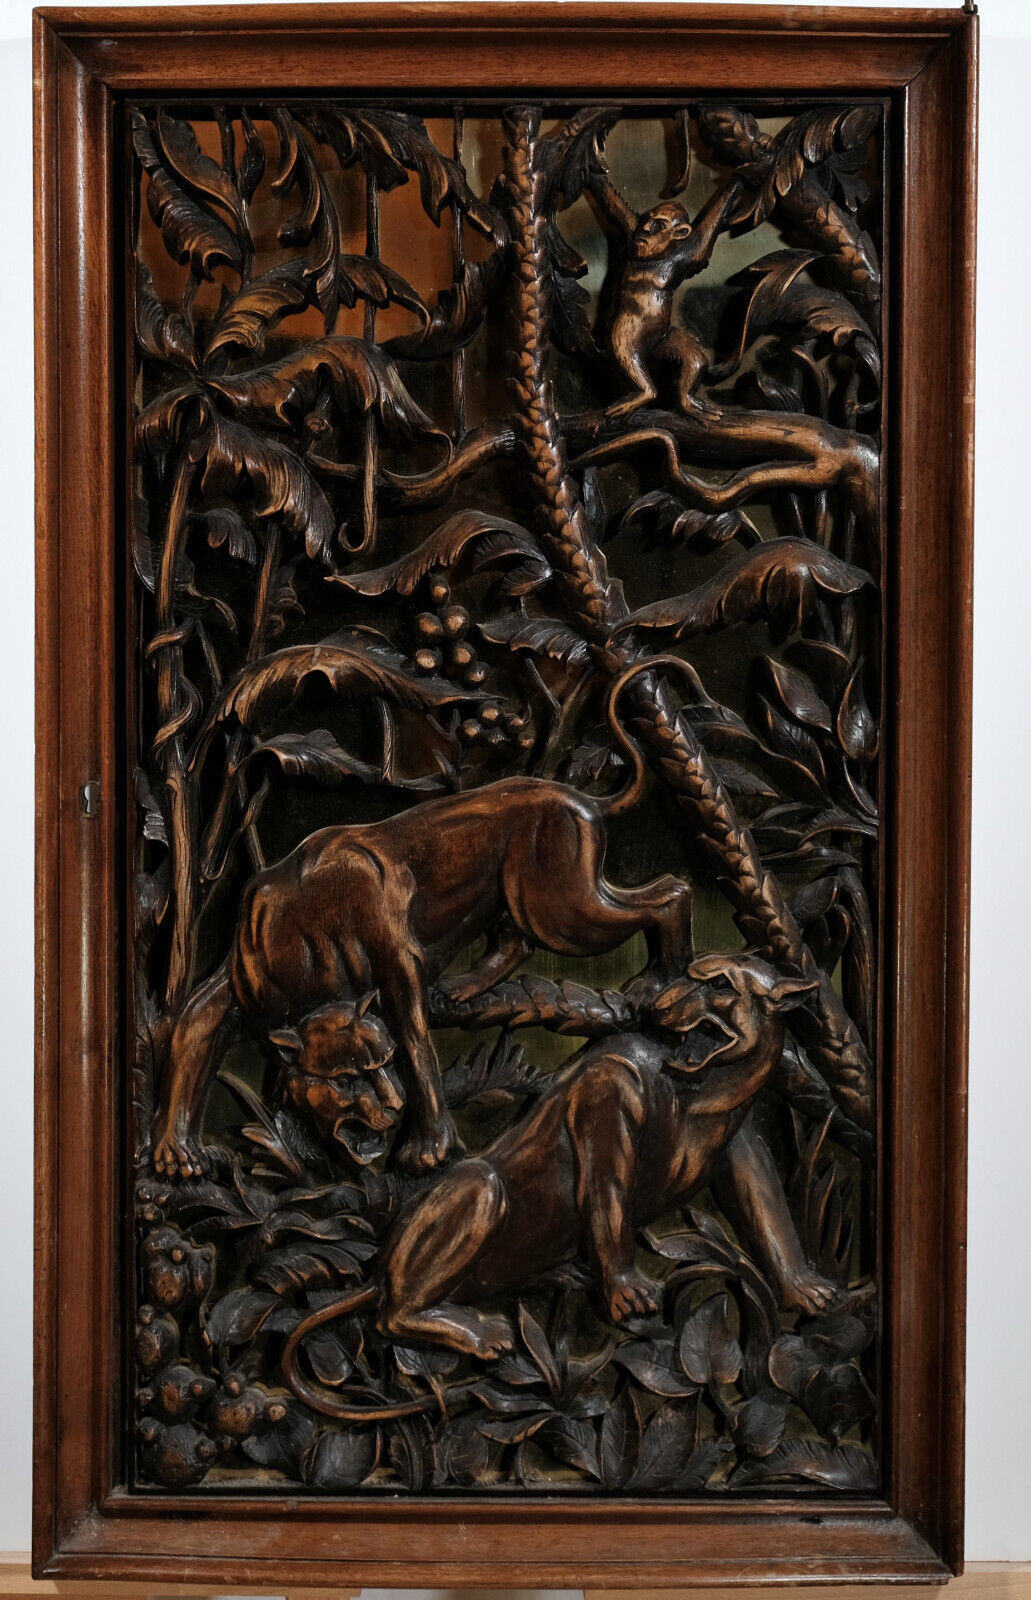 Asian Jungle Scene Intricately Hand Carved Cabinet Door Golden Mirrored & Framed